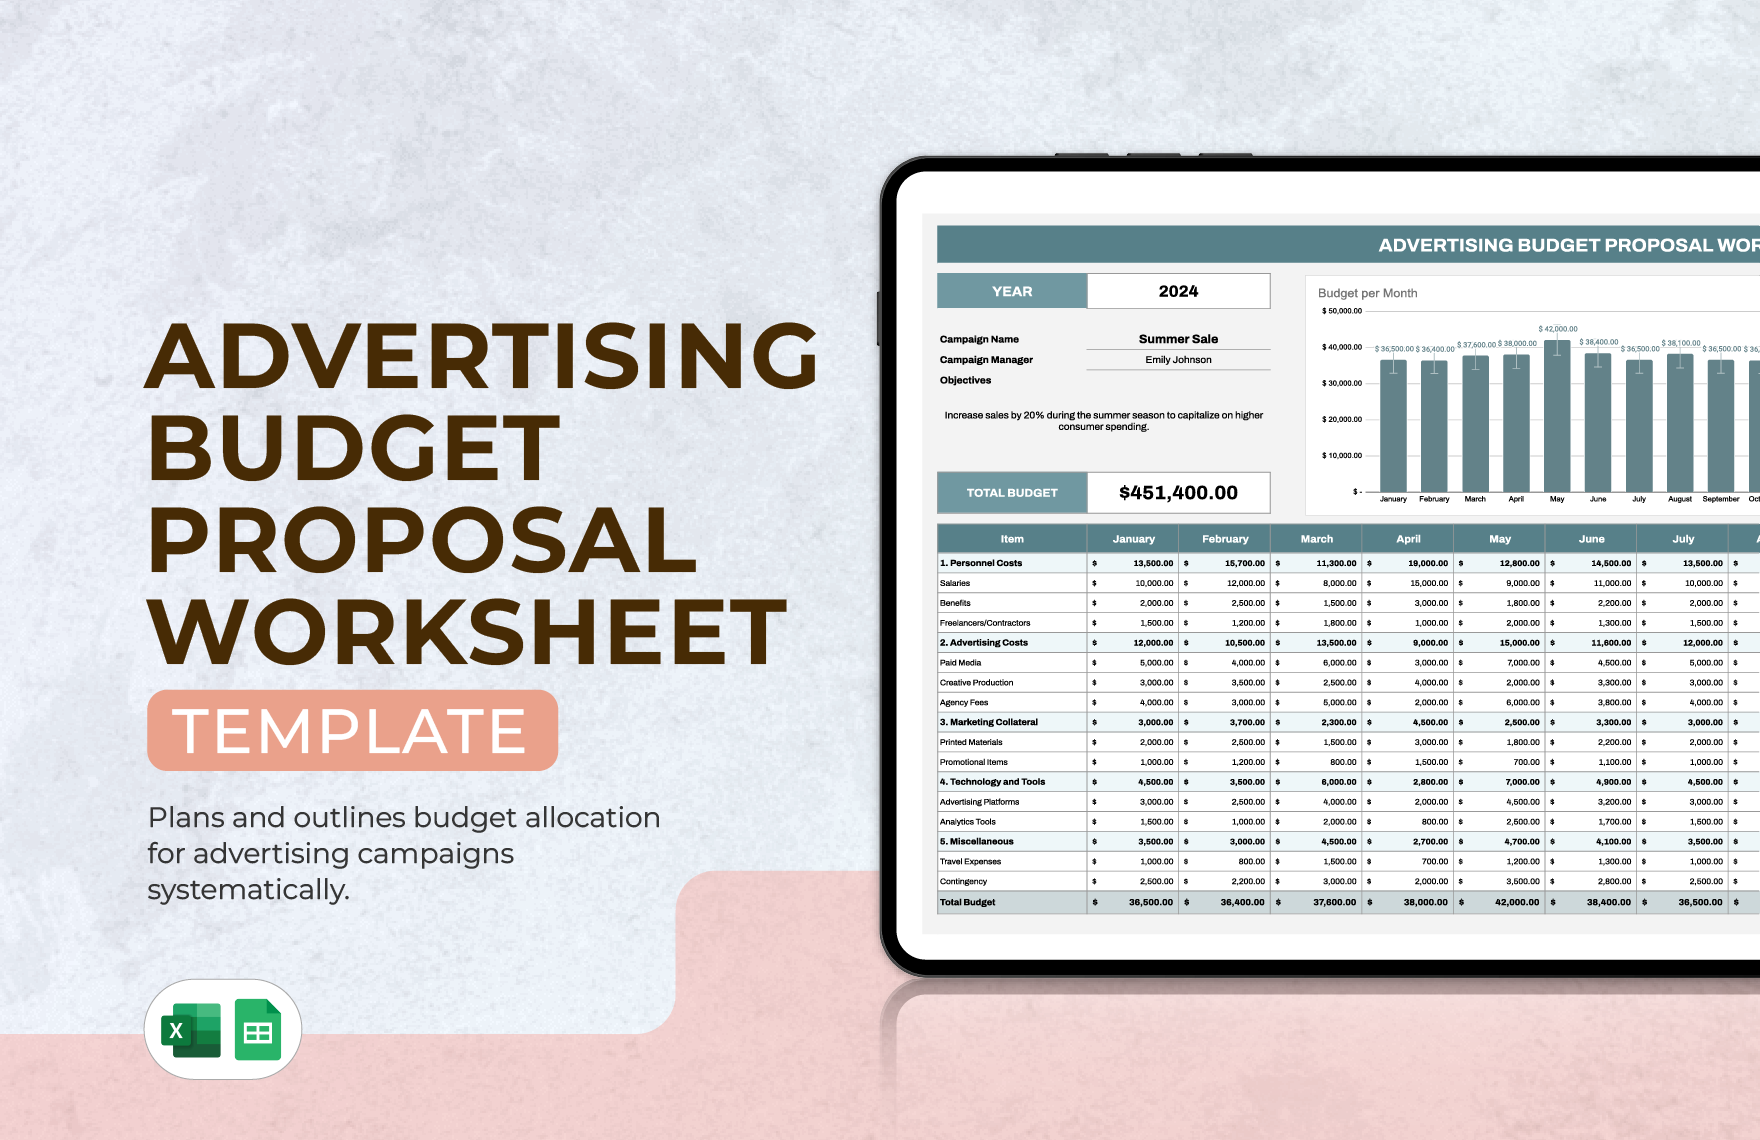 Advertising Budget Proposal Worksheet Template in Excel, Google Sheets